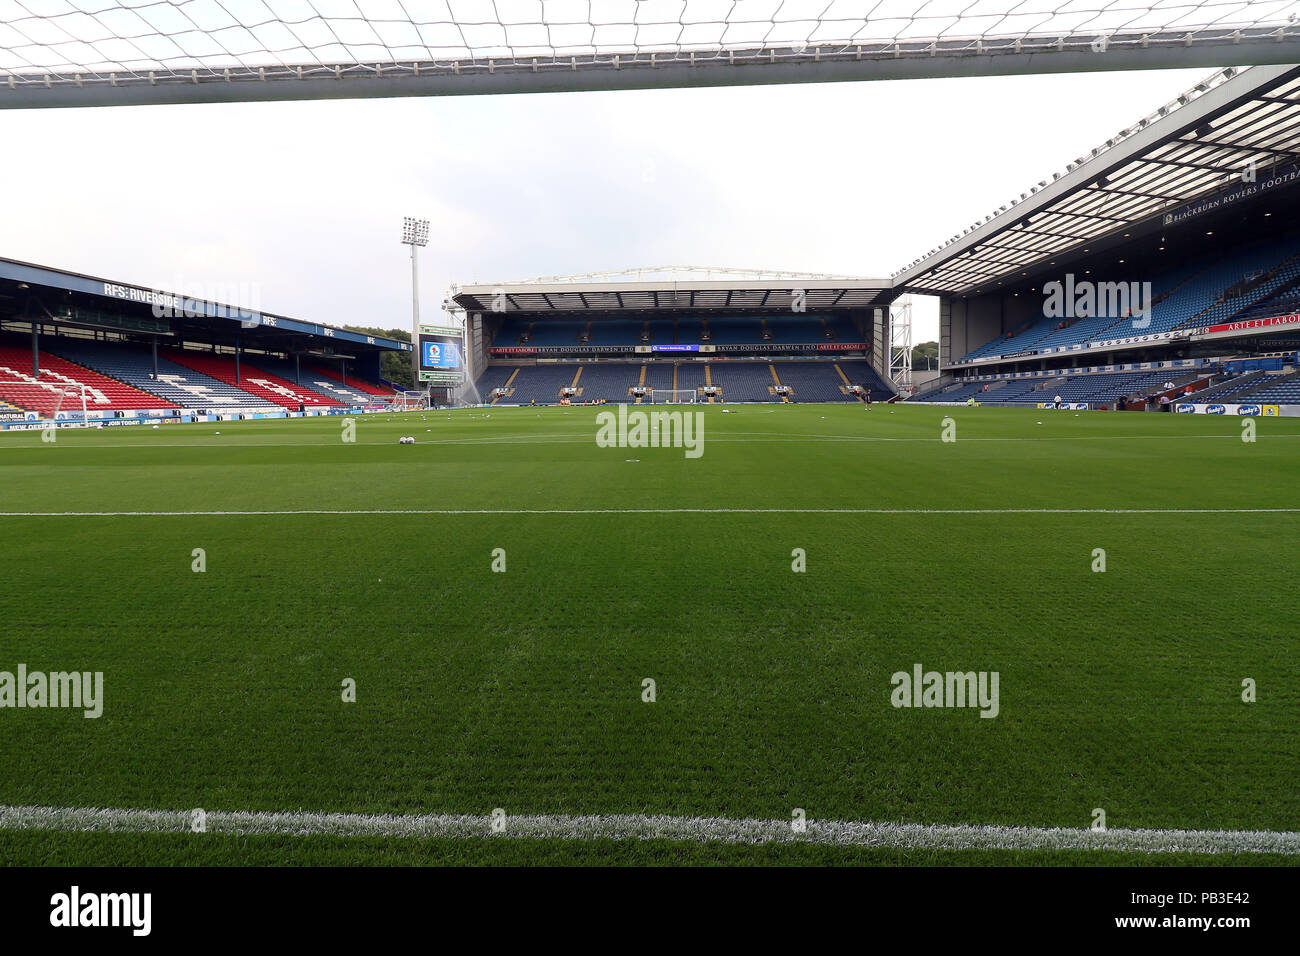 Blackburn, Lancashire, UK. 26th July, 2018. A general view of Ewood Park before the Pre-Season Friendly match between Blackburn Rovers and Everton at Ewood Park on July 26th 2018 in Blackburn, England. Credit: PHC Images/Alamy Live News Stock Photo